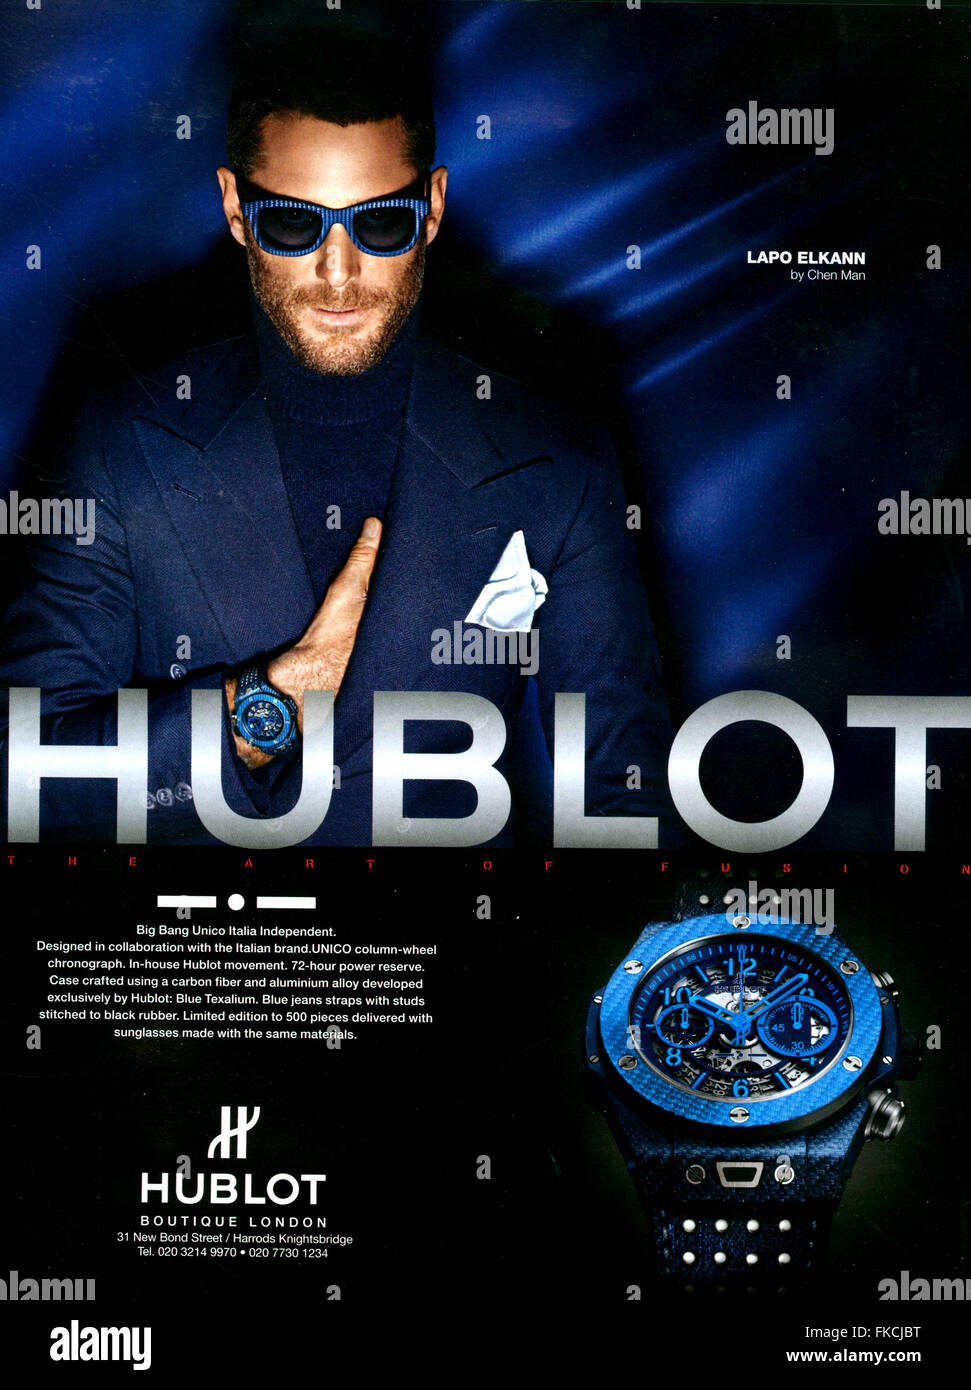 The Hublot Big Bang Marc Ferrero: A review by The Watch Guide